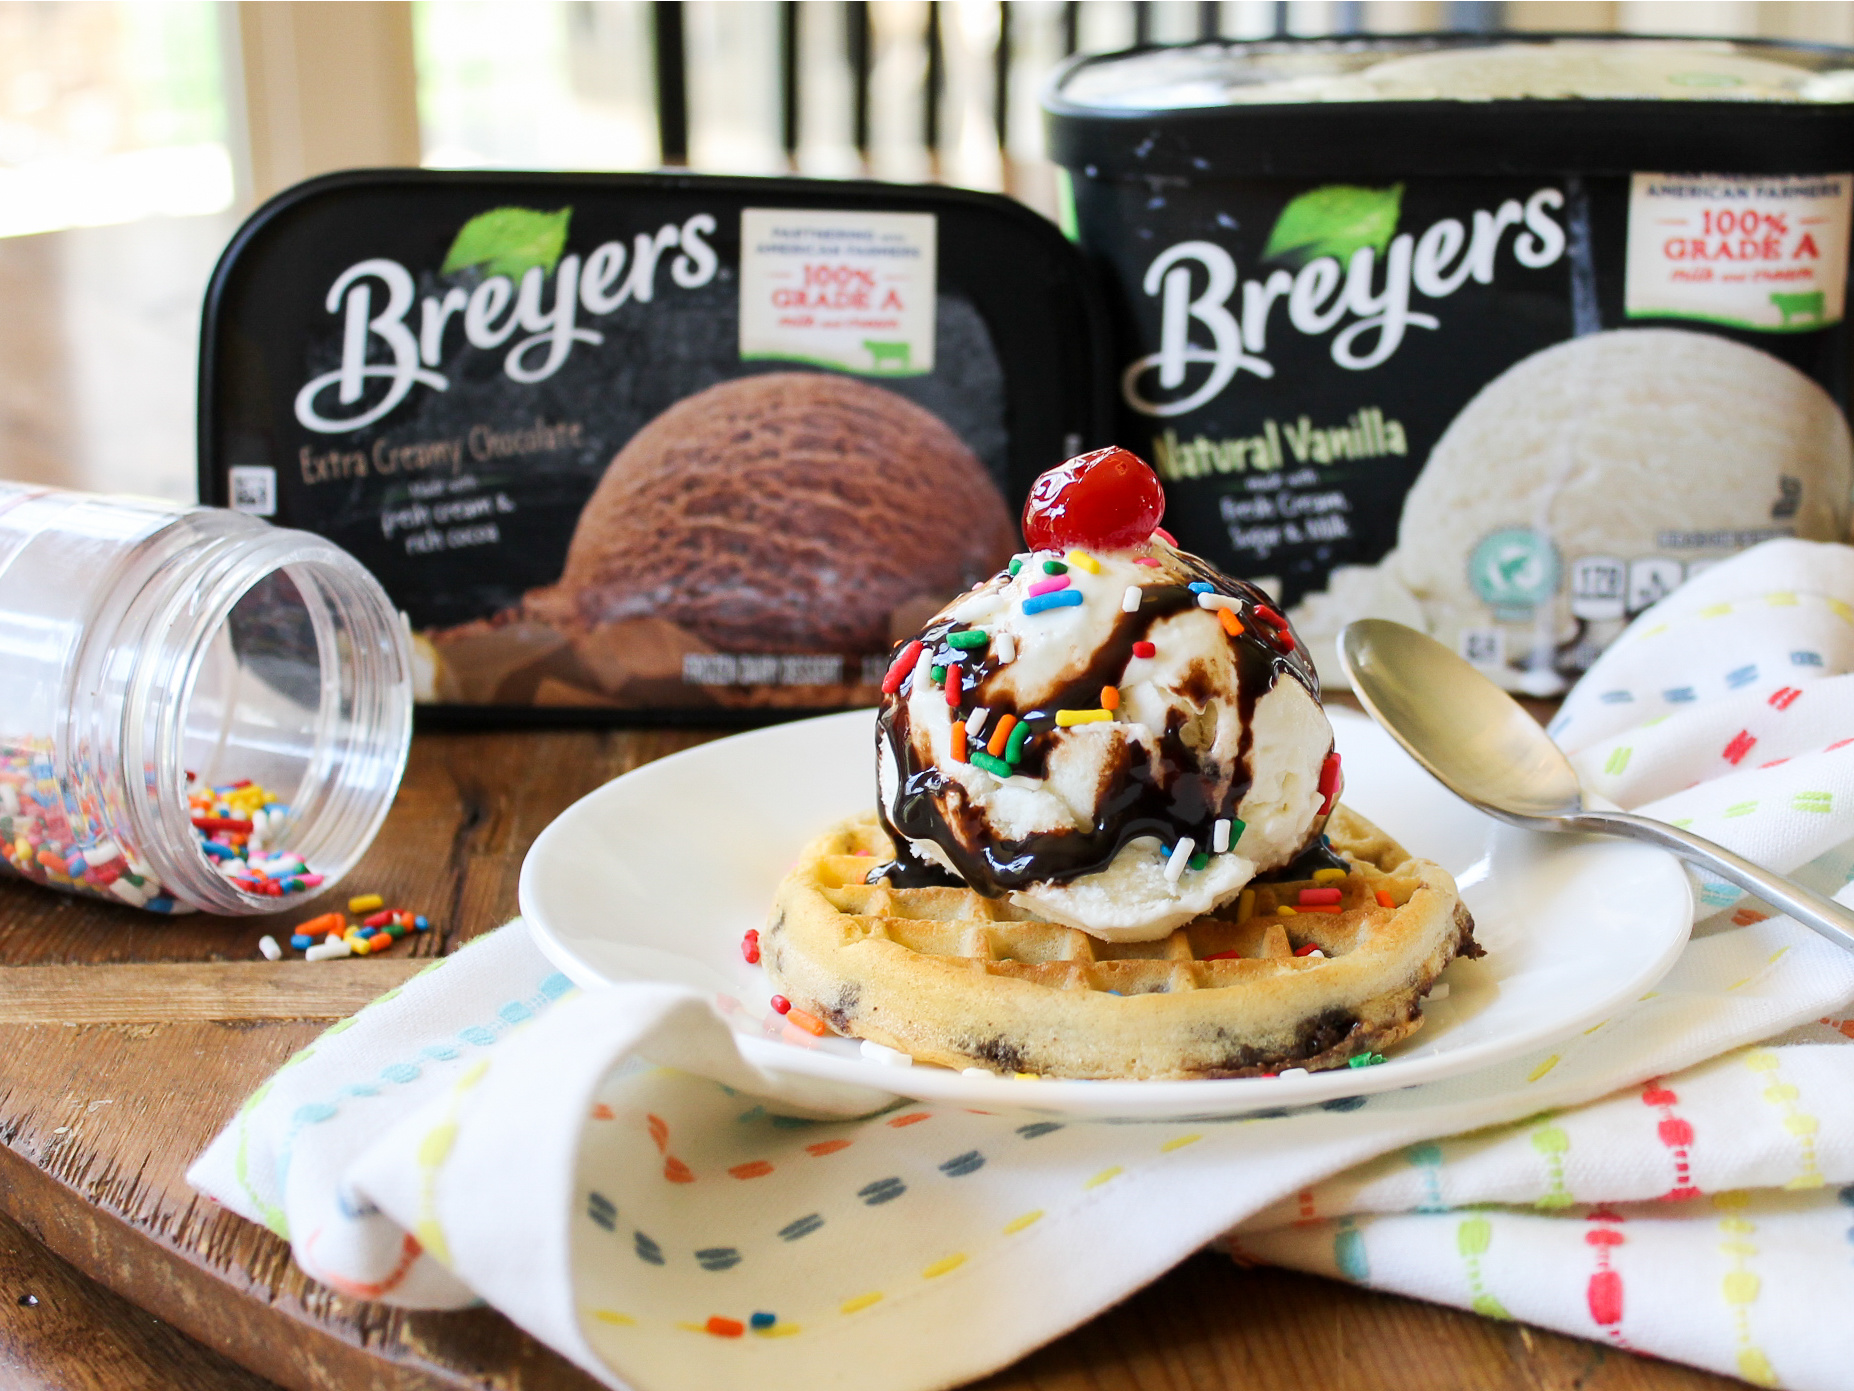 Breyers Ice Cream Is Buy One, Get One Free - Better Make Room In The Freezer! on I Heart Publix 3